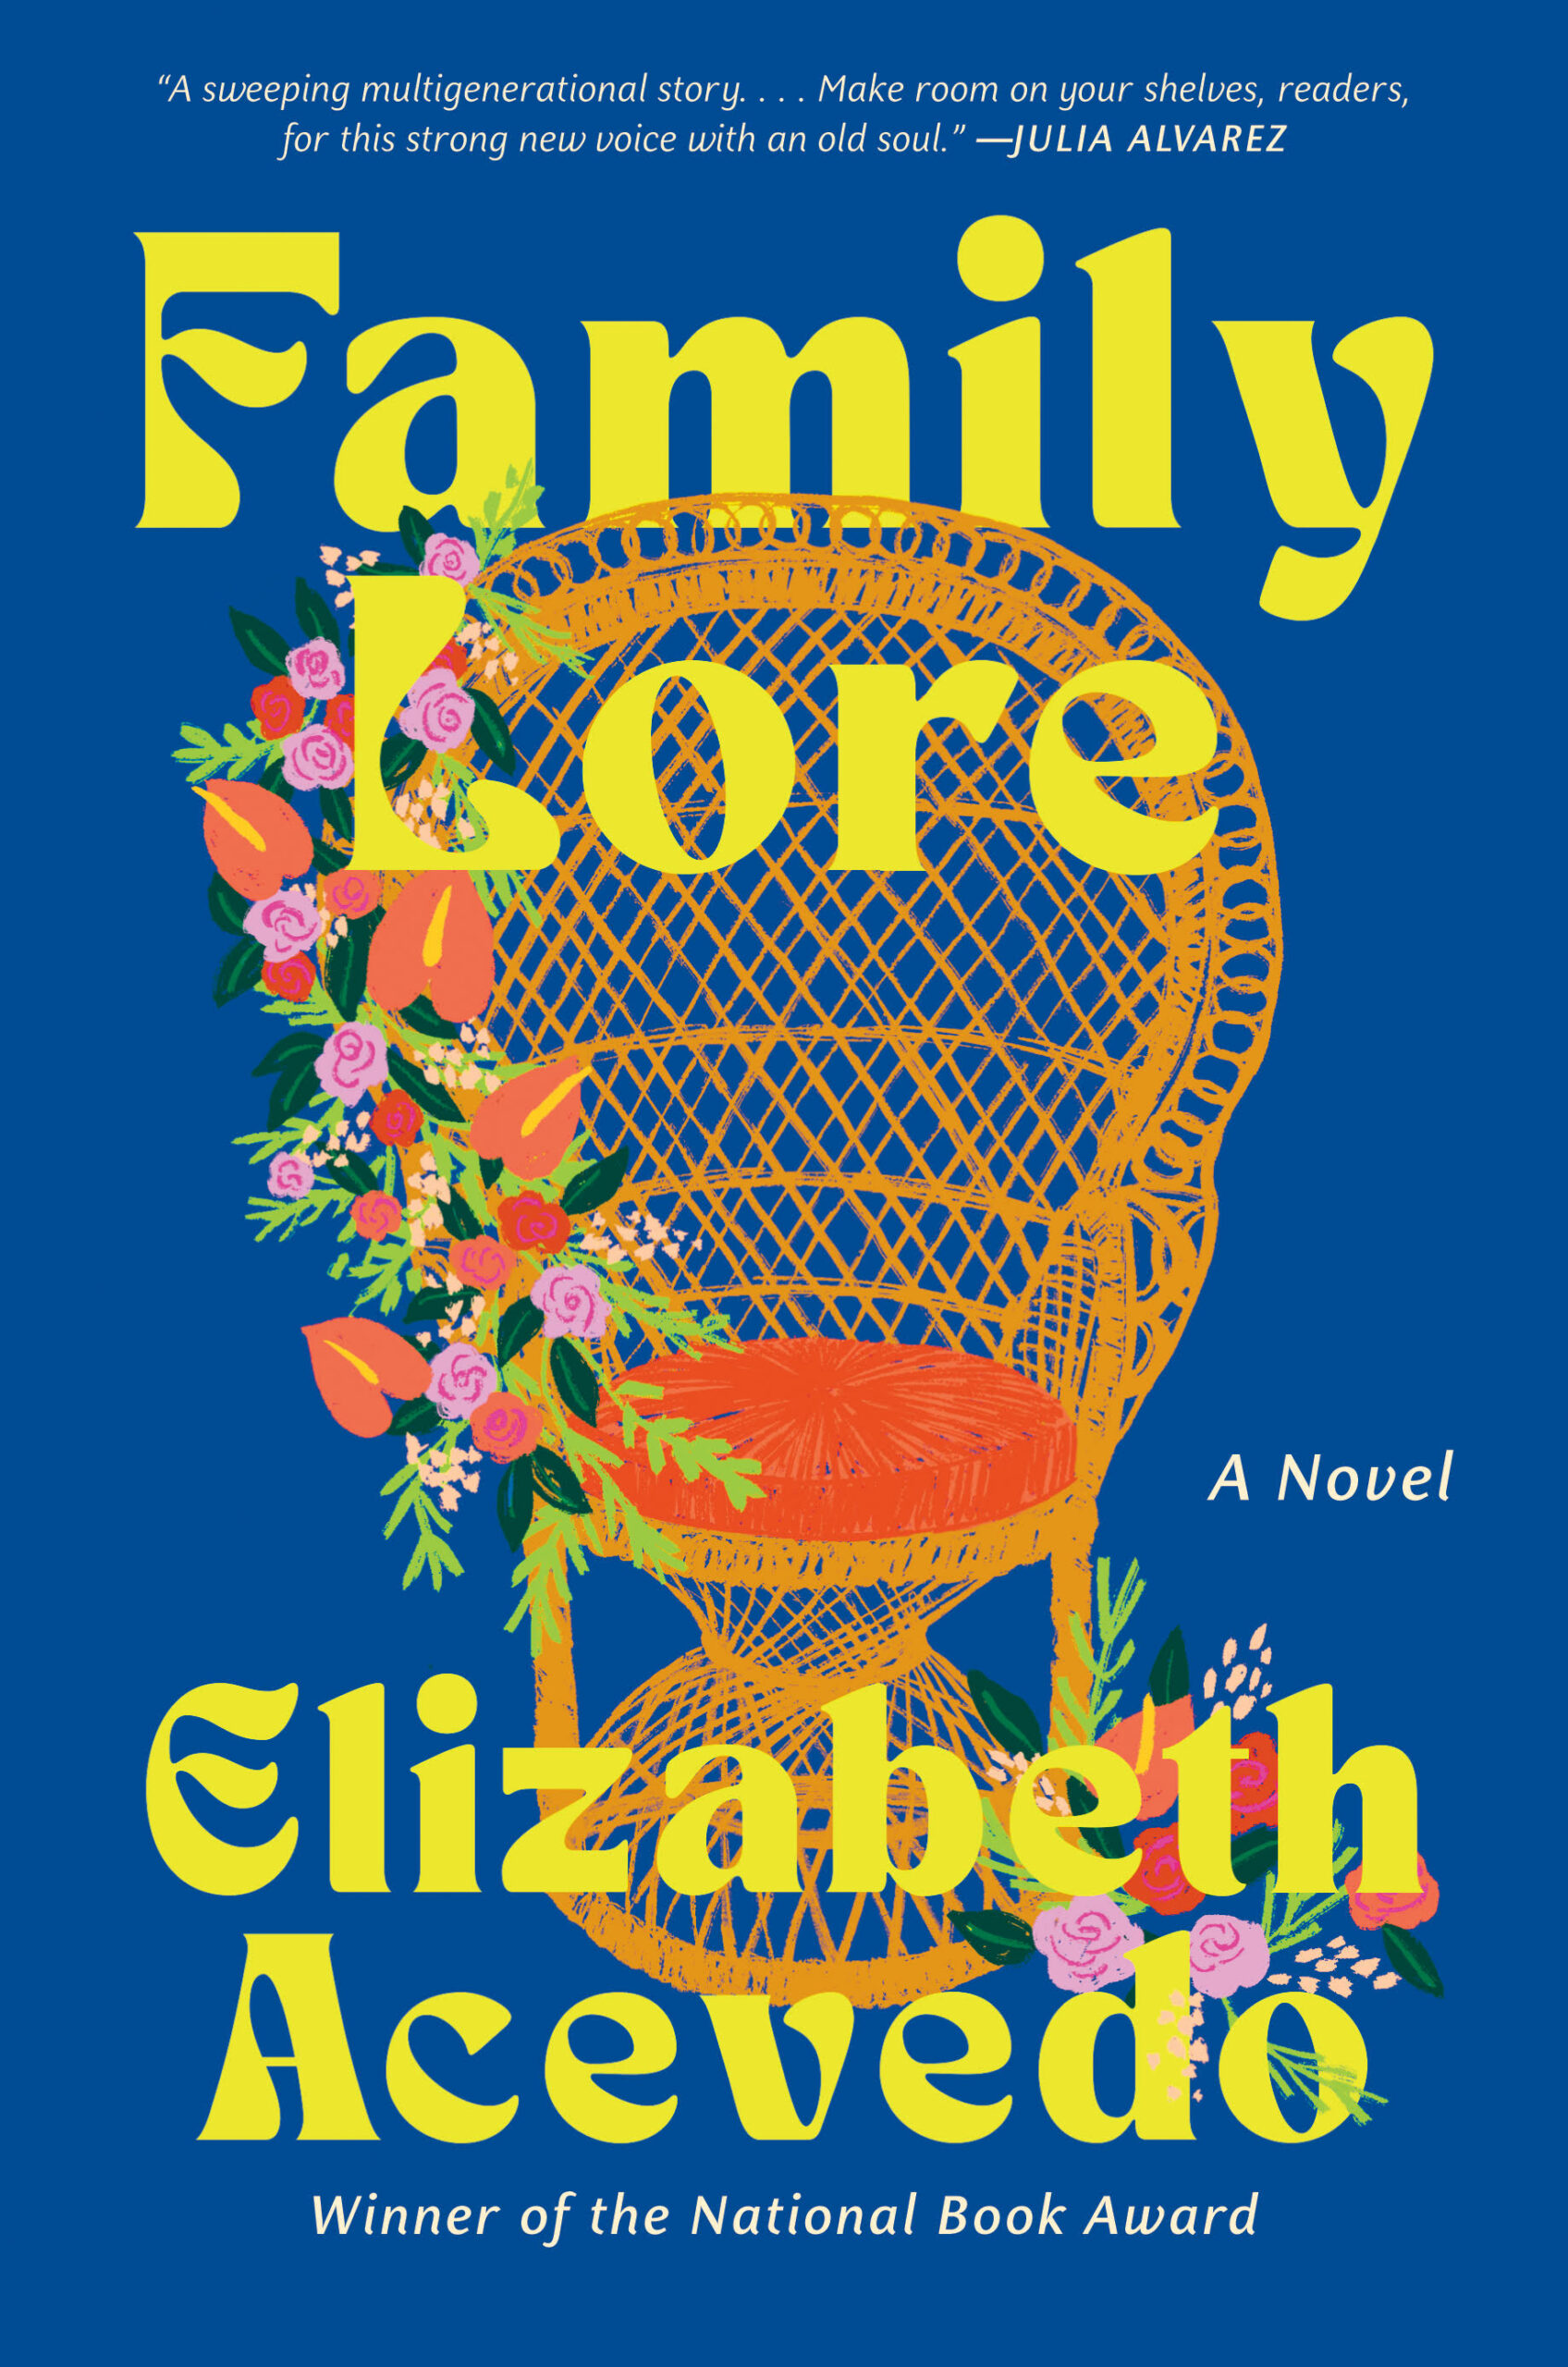 Book Cover Image of “Family Lore”